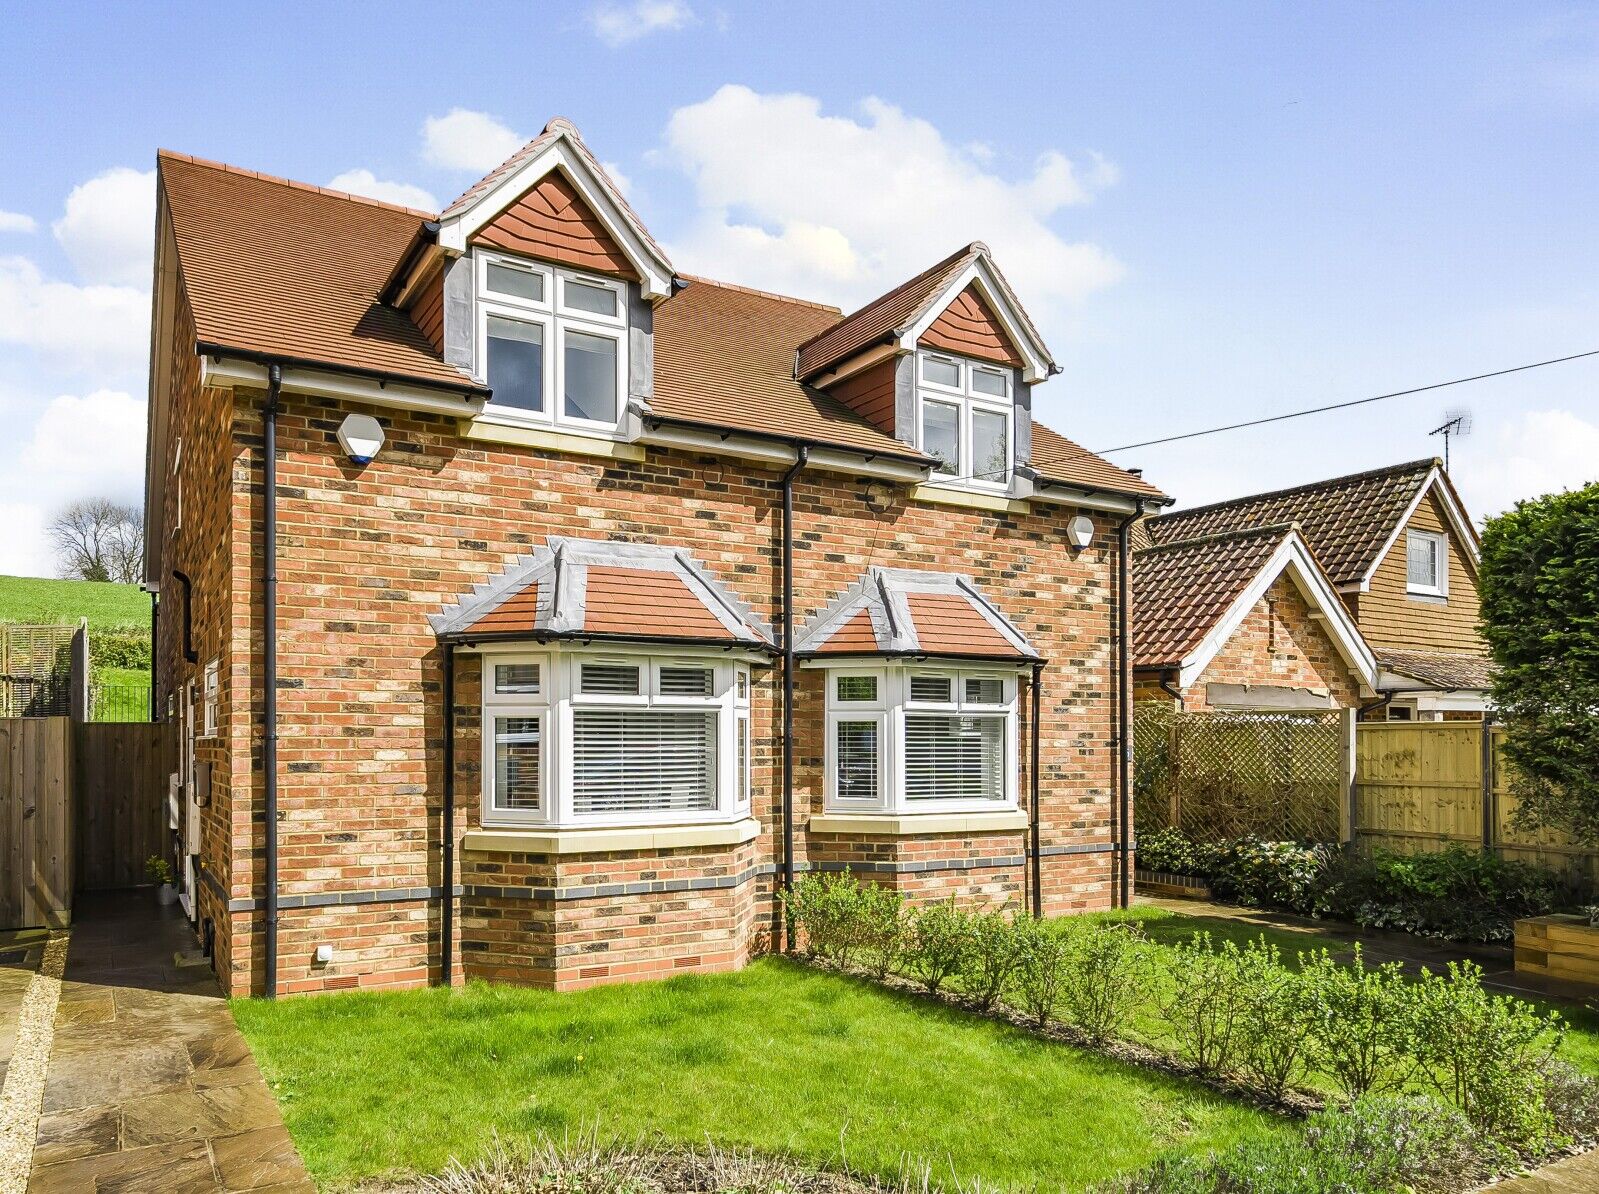 2 bedroom semi detached house for sale Hillview Close, Sonning Common, RG4, main image